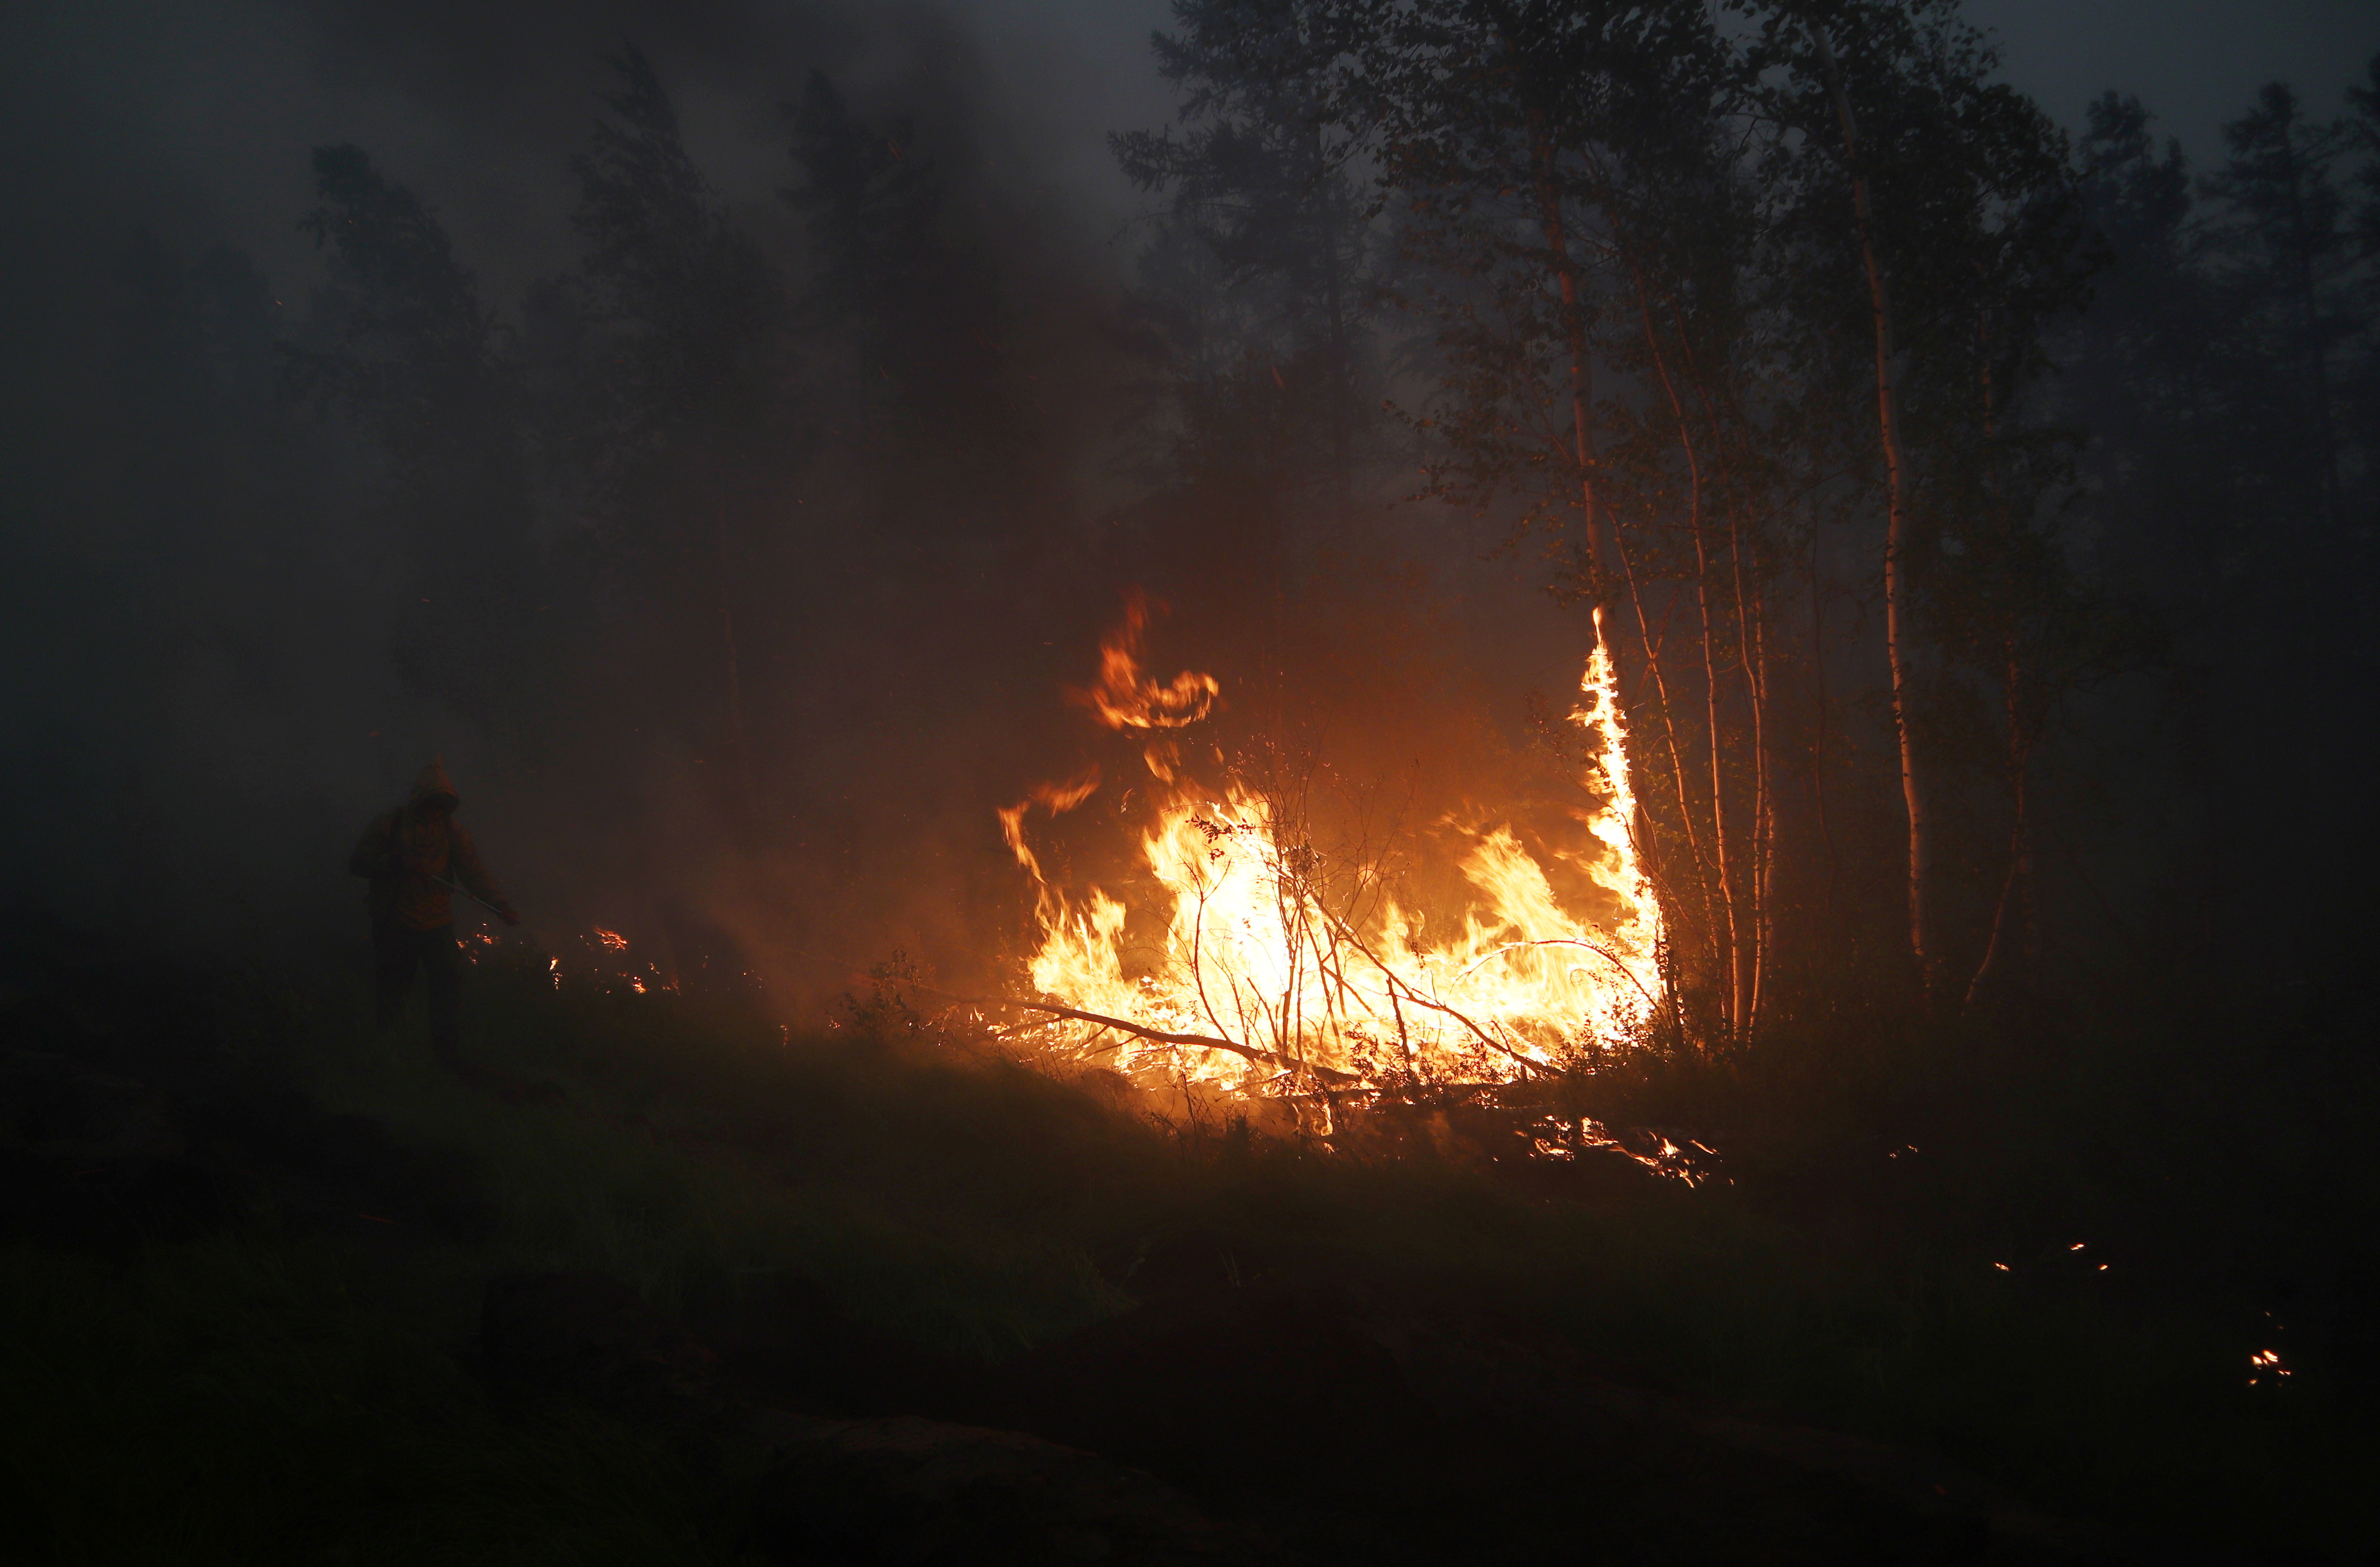 A firefighter works to extinguish a forest fire in Yakutia